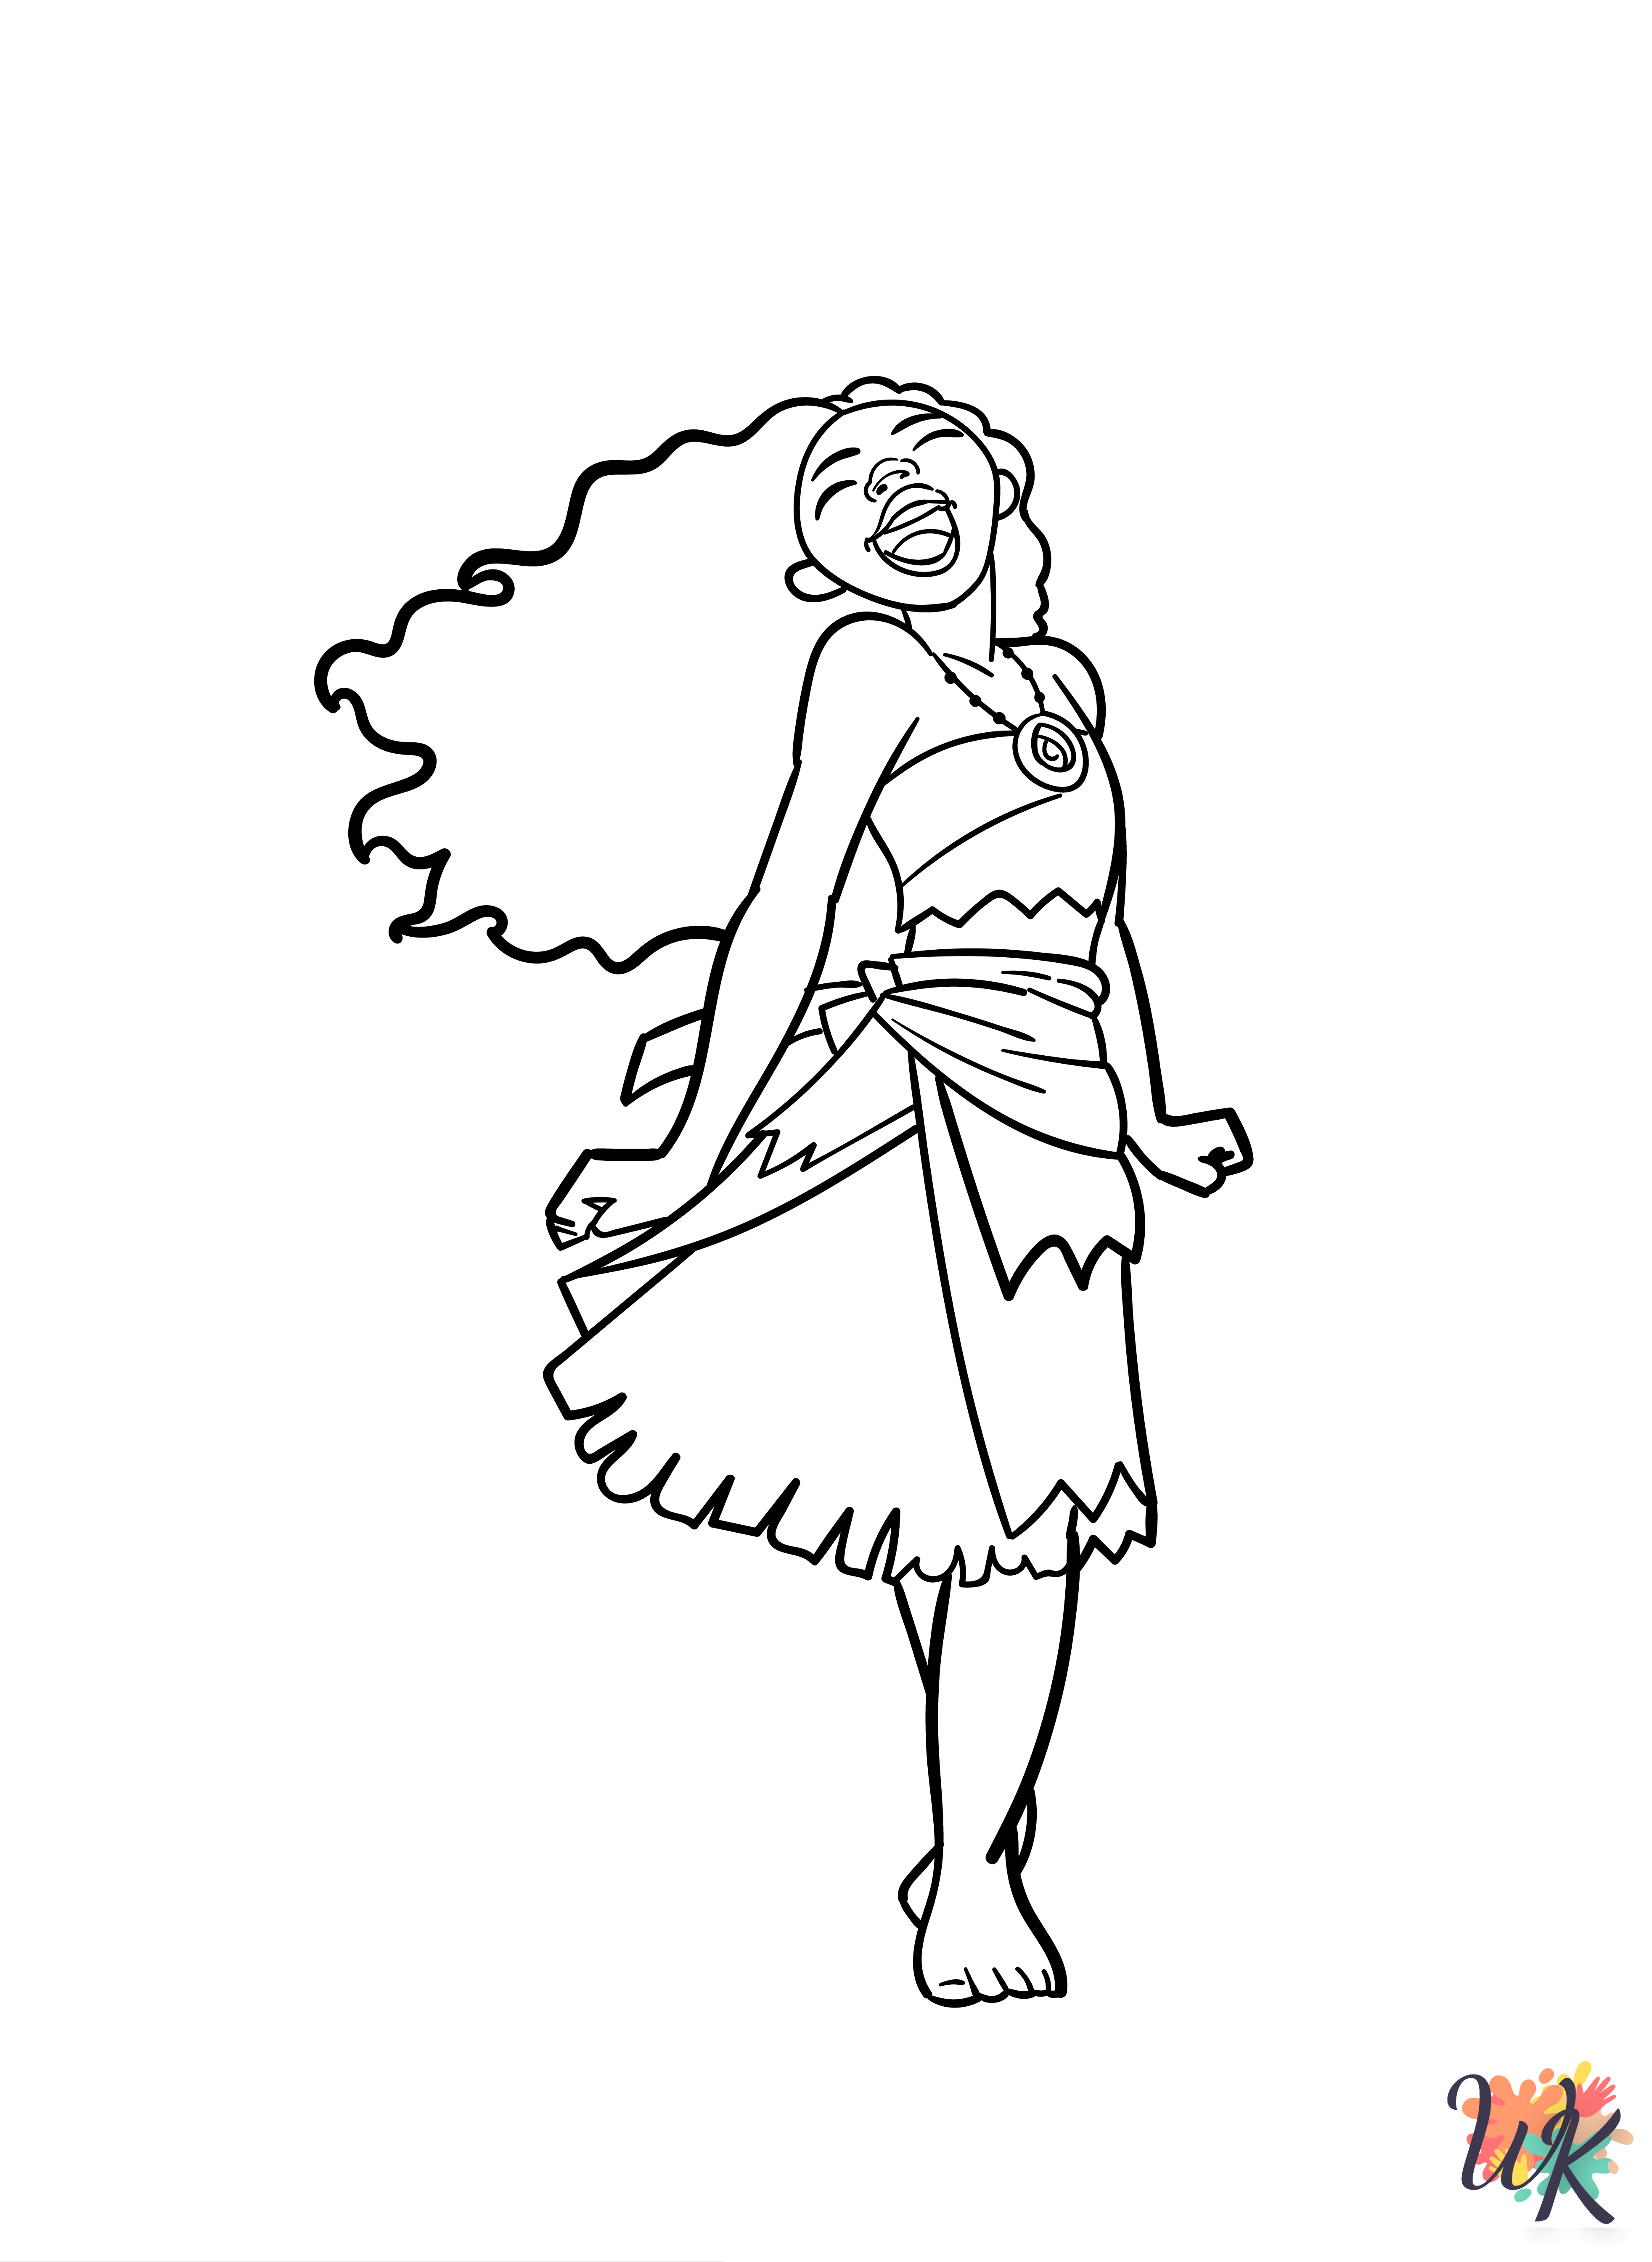 Moana coloring pages for adults